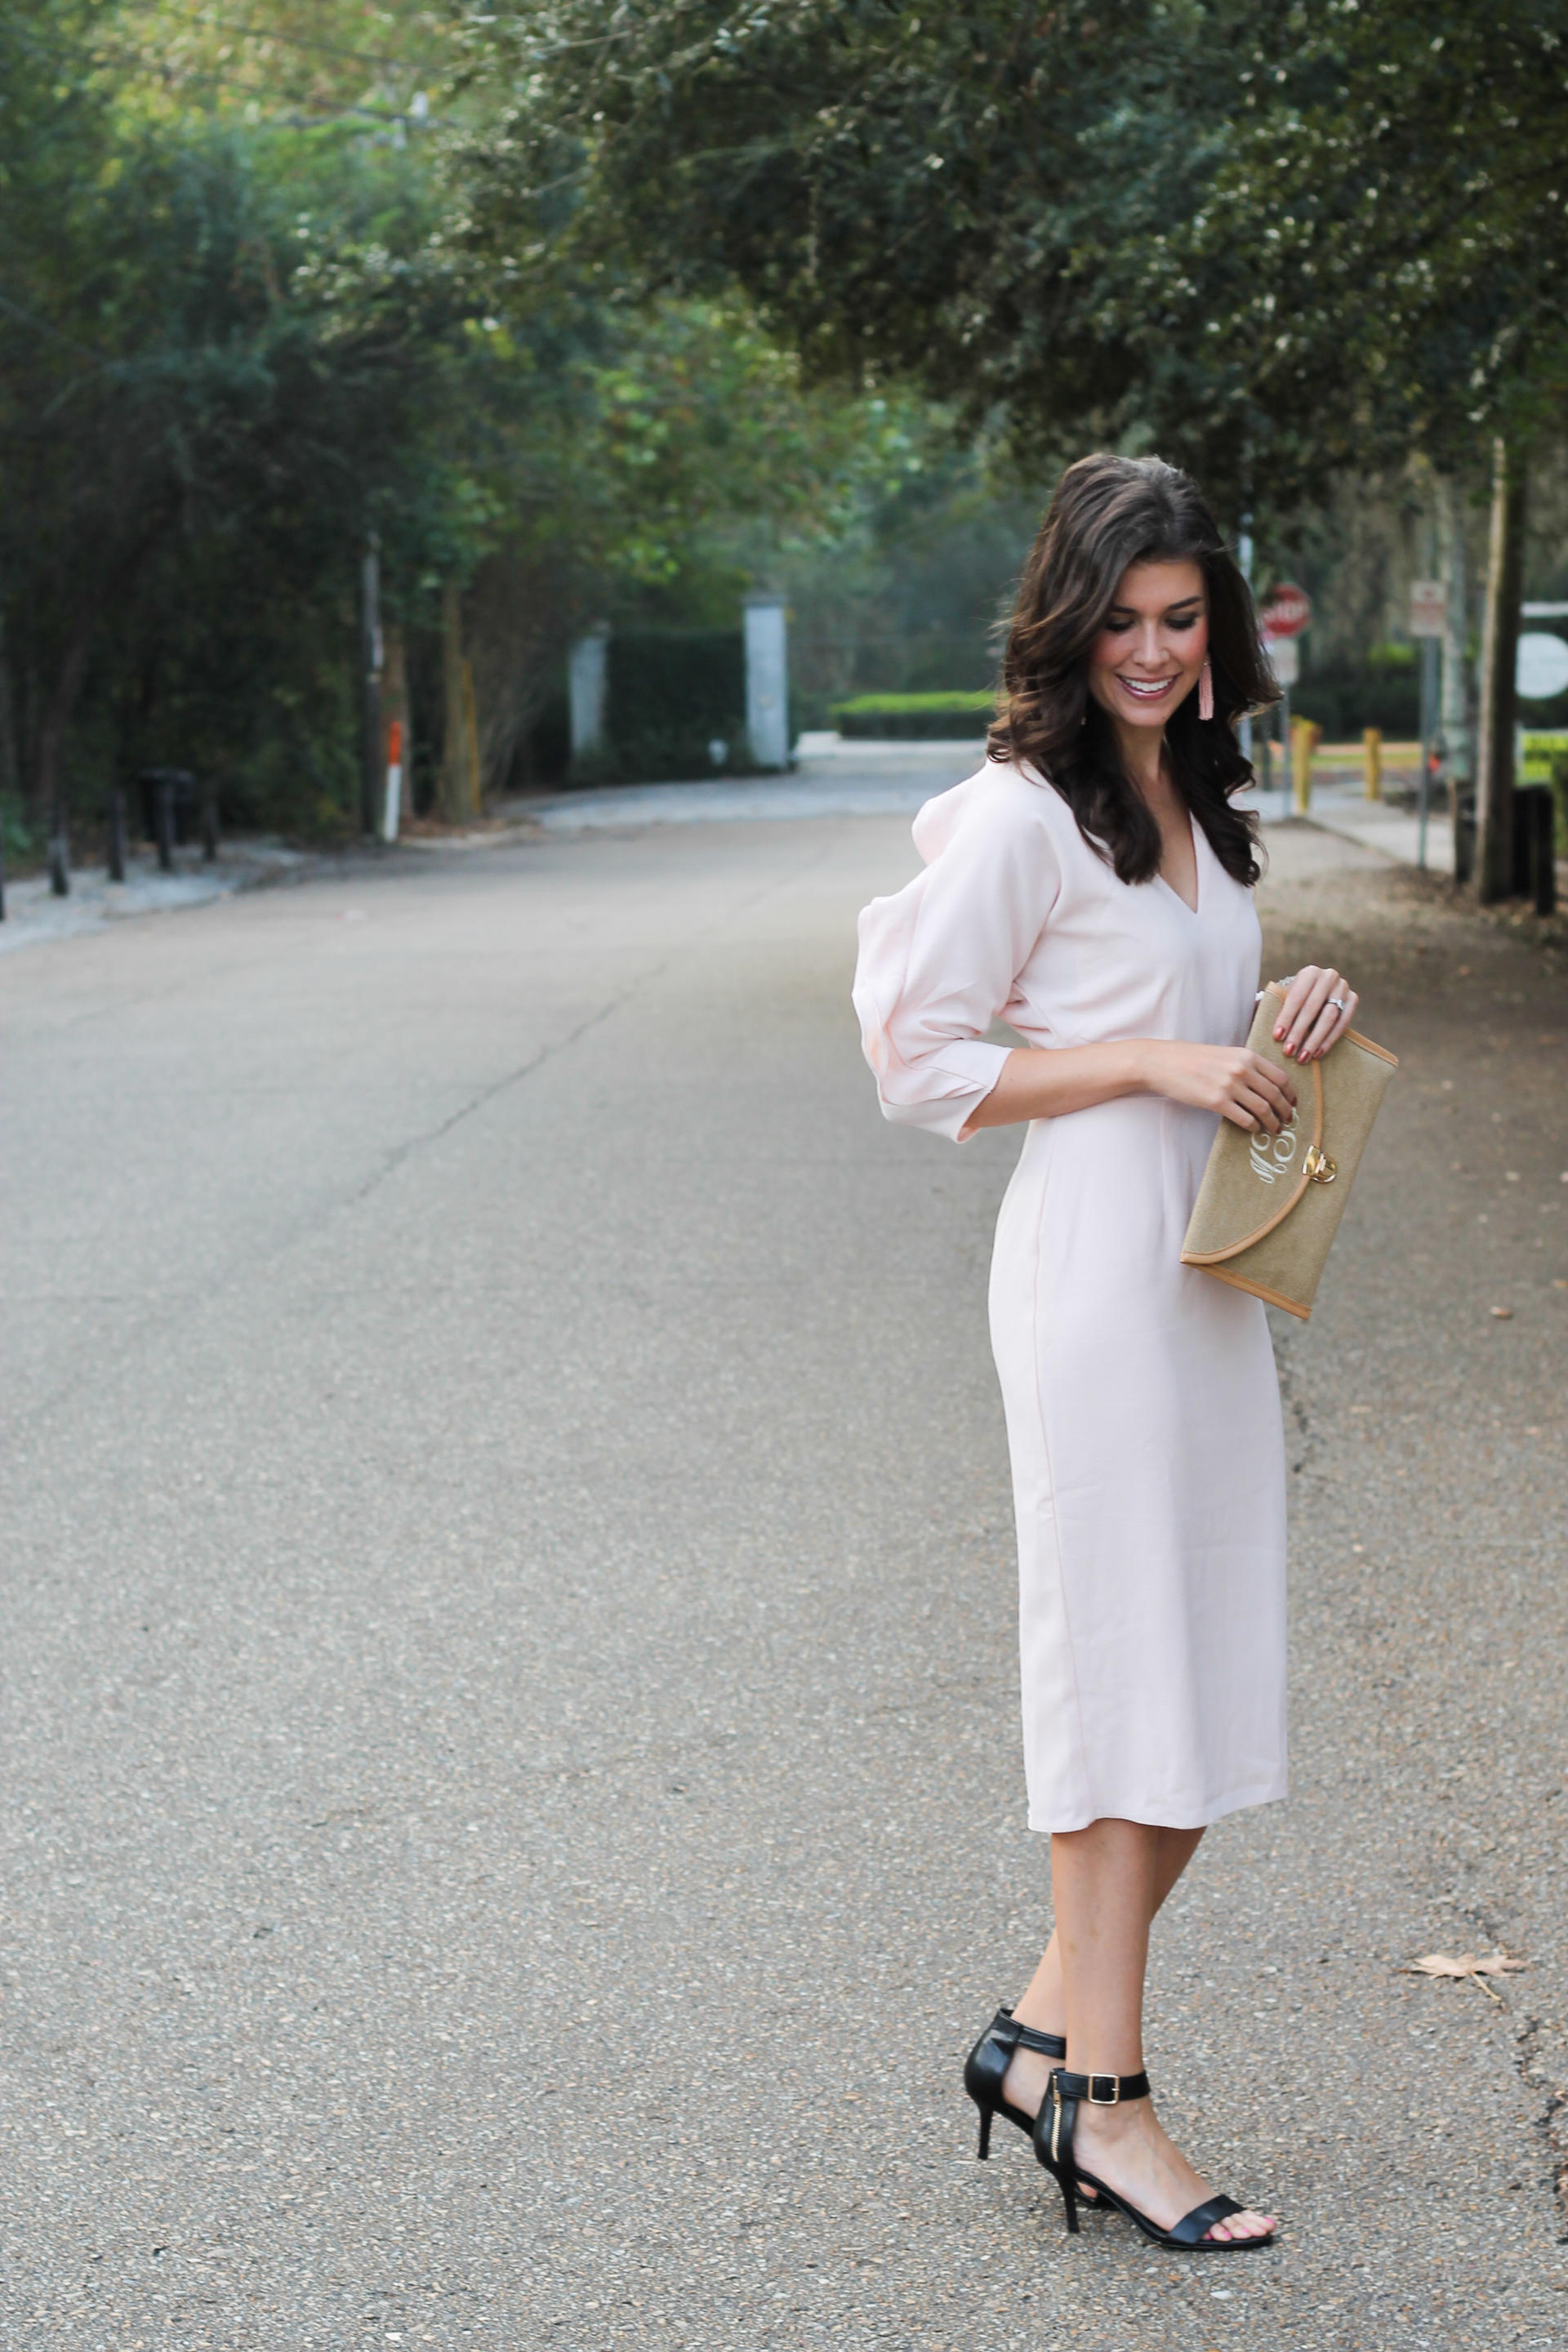 A Holiday In Ruffles With This ASOS Blush Dress by New York fashion blogger Style Waltz